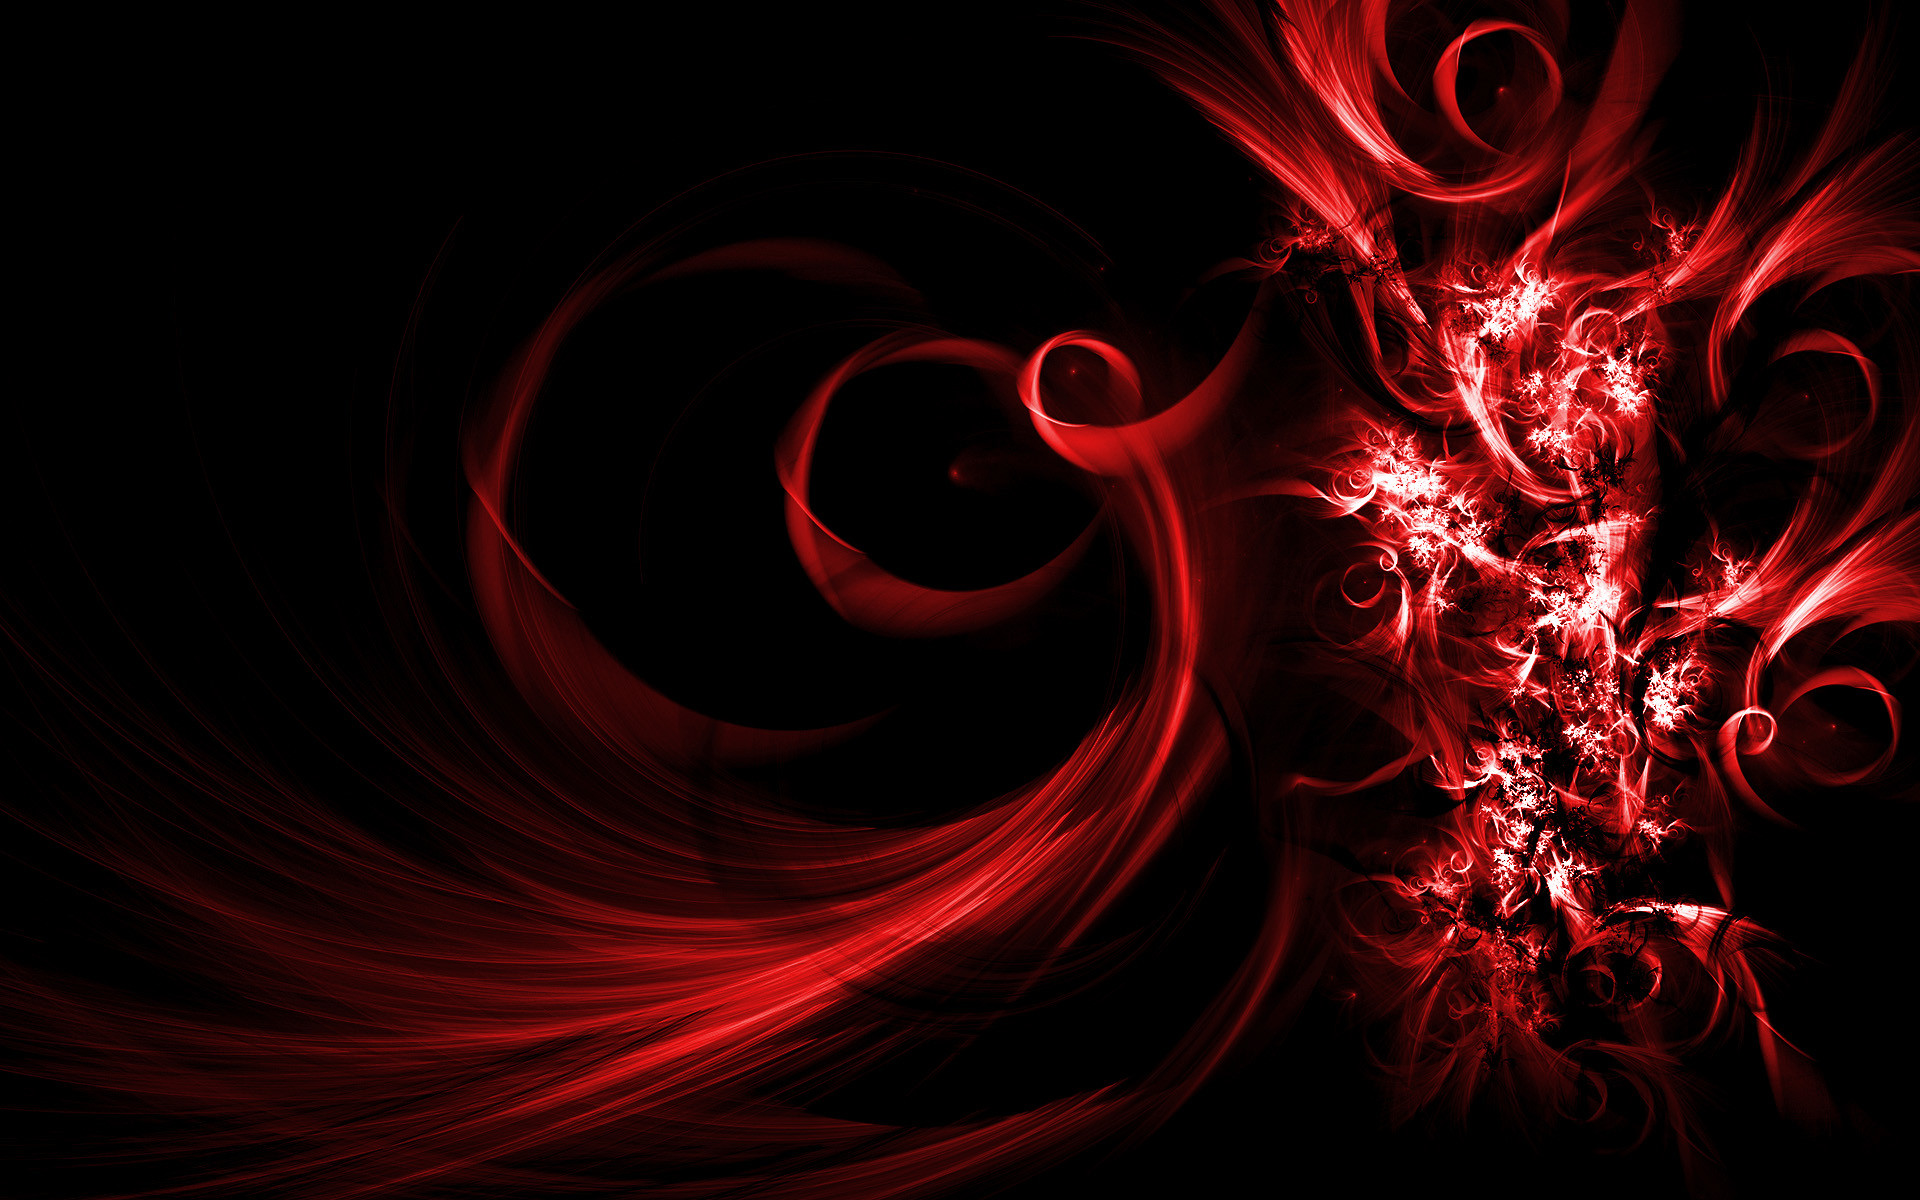 1920x1200 File Name Abstract Red Wallpaper HD 19201200 